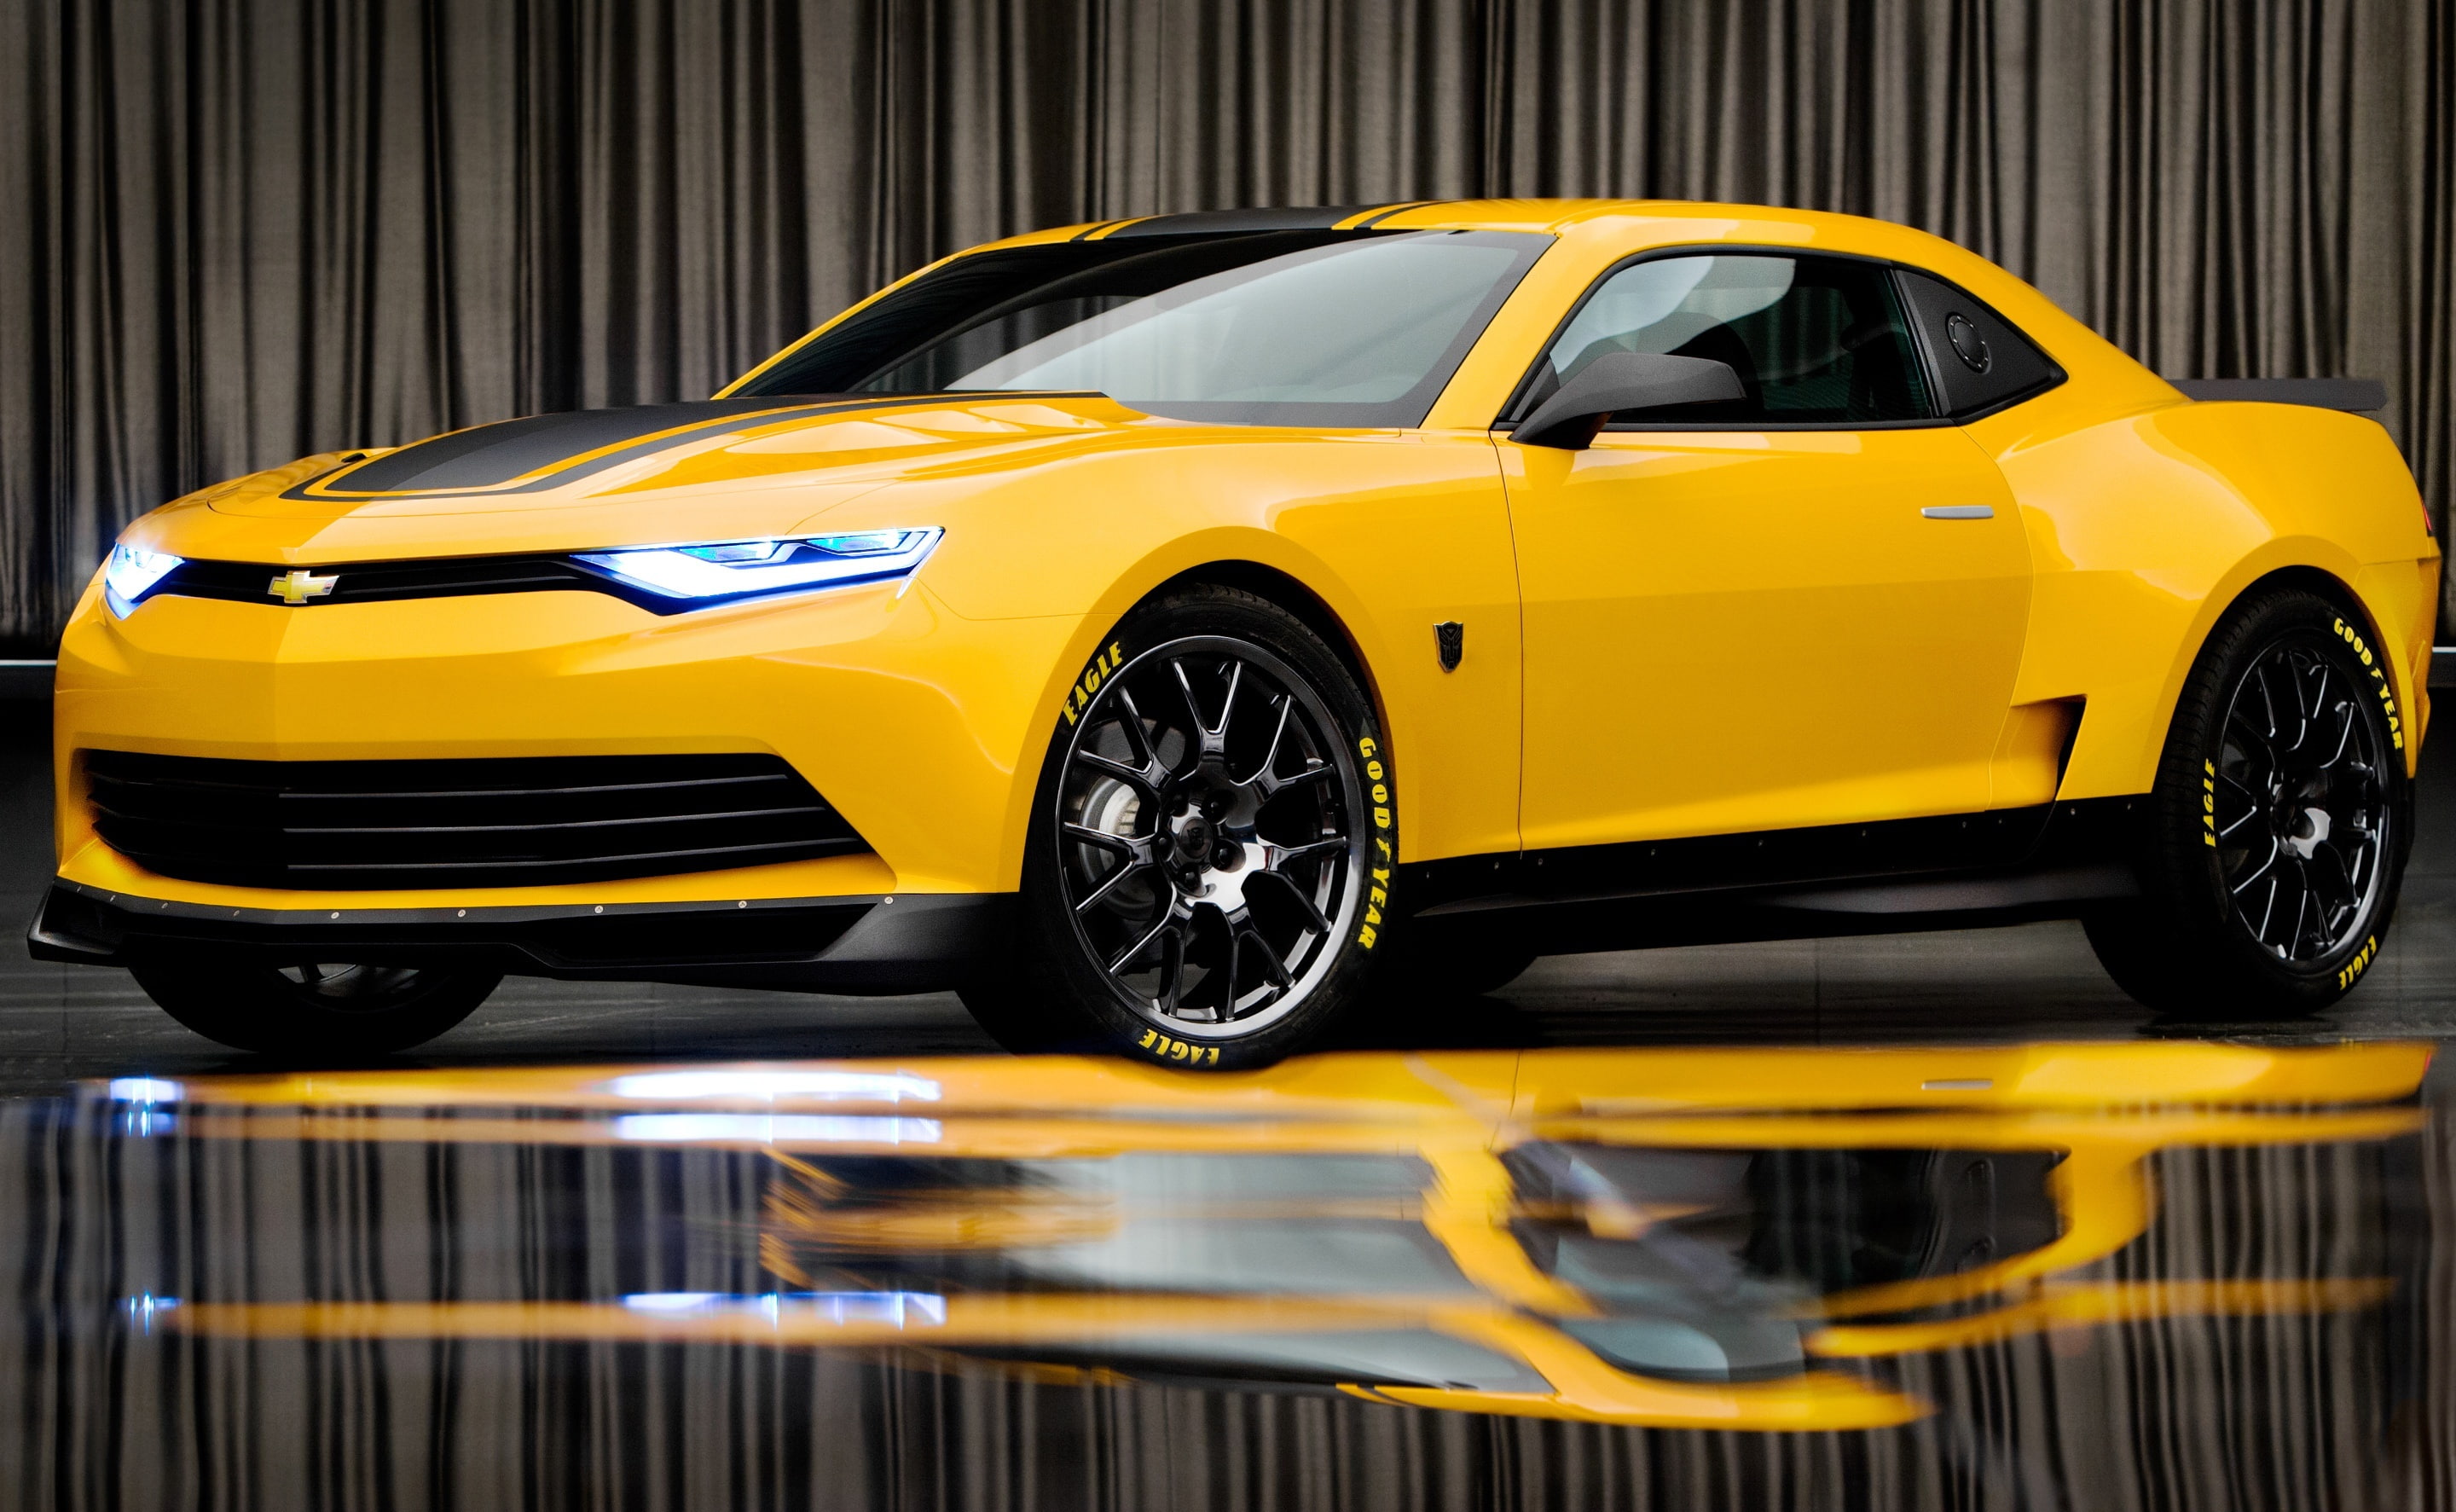 2014 Bumblebee Concept, yellow Chevrolet Camaro coupe, Cars, transformers